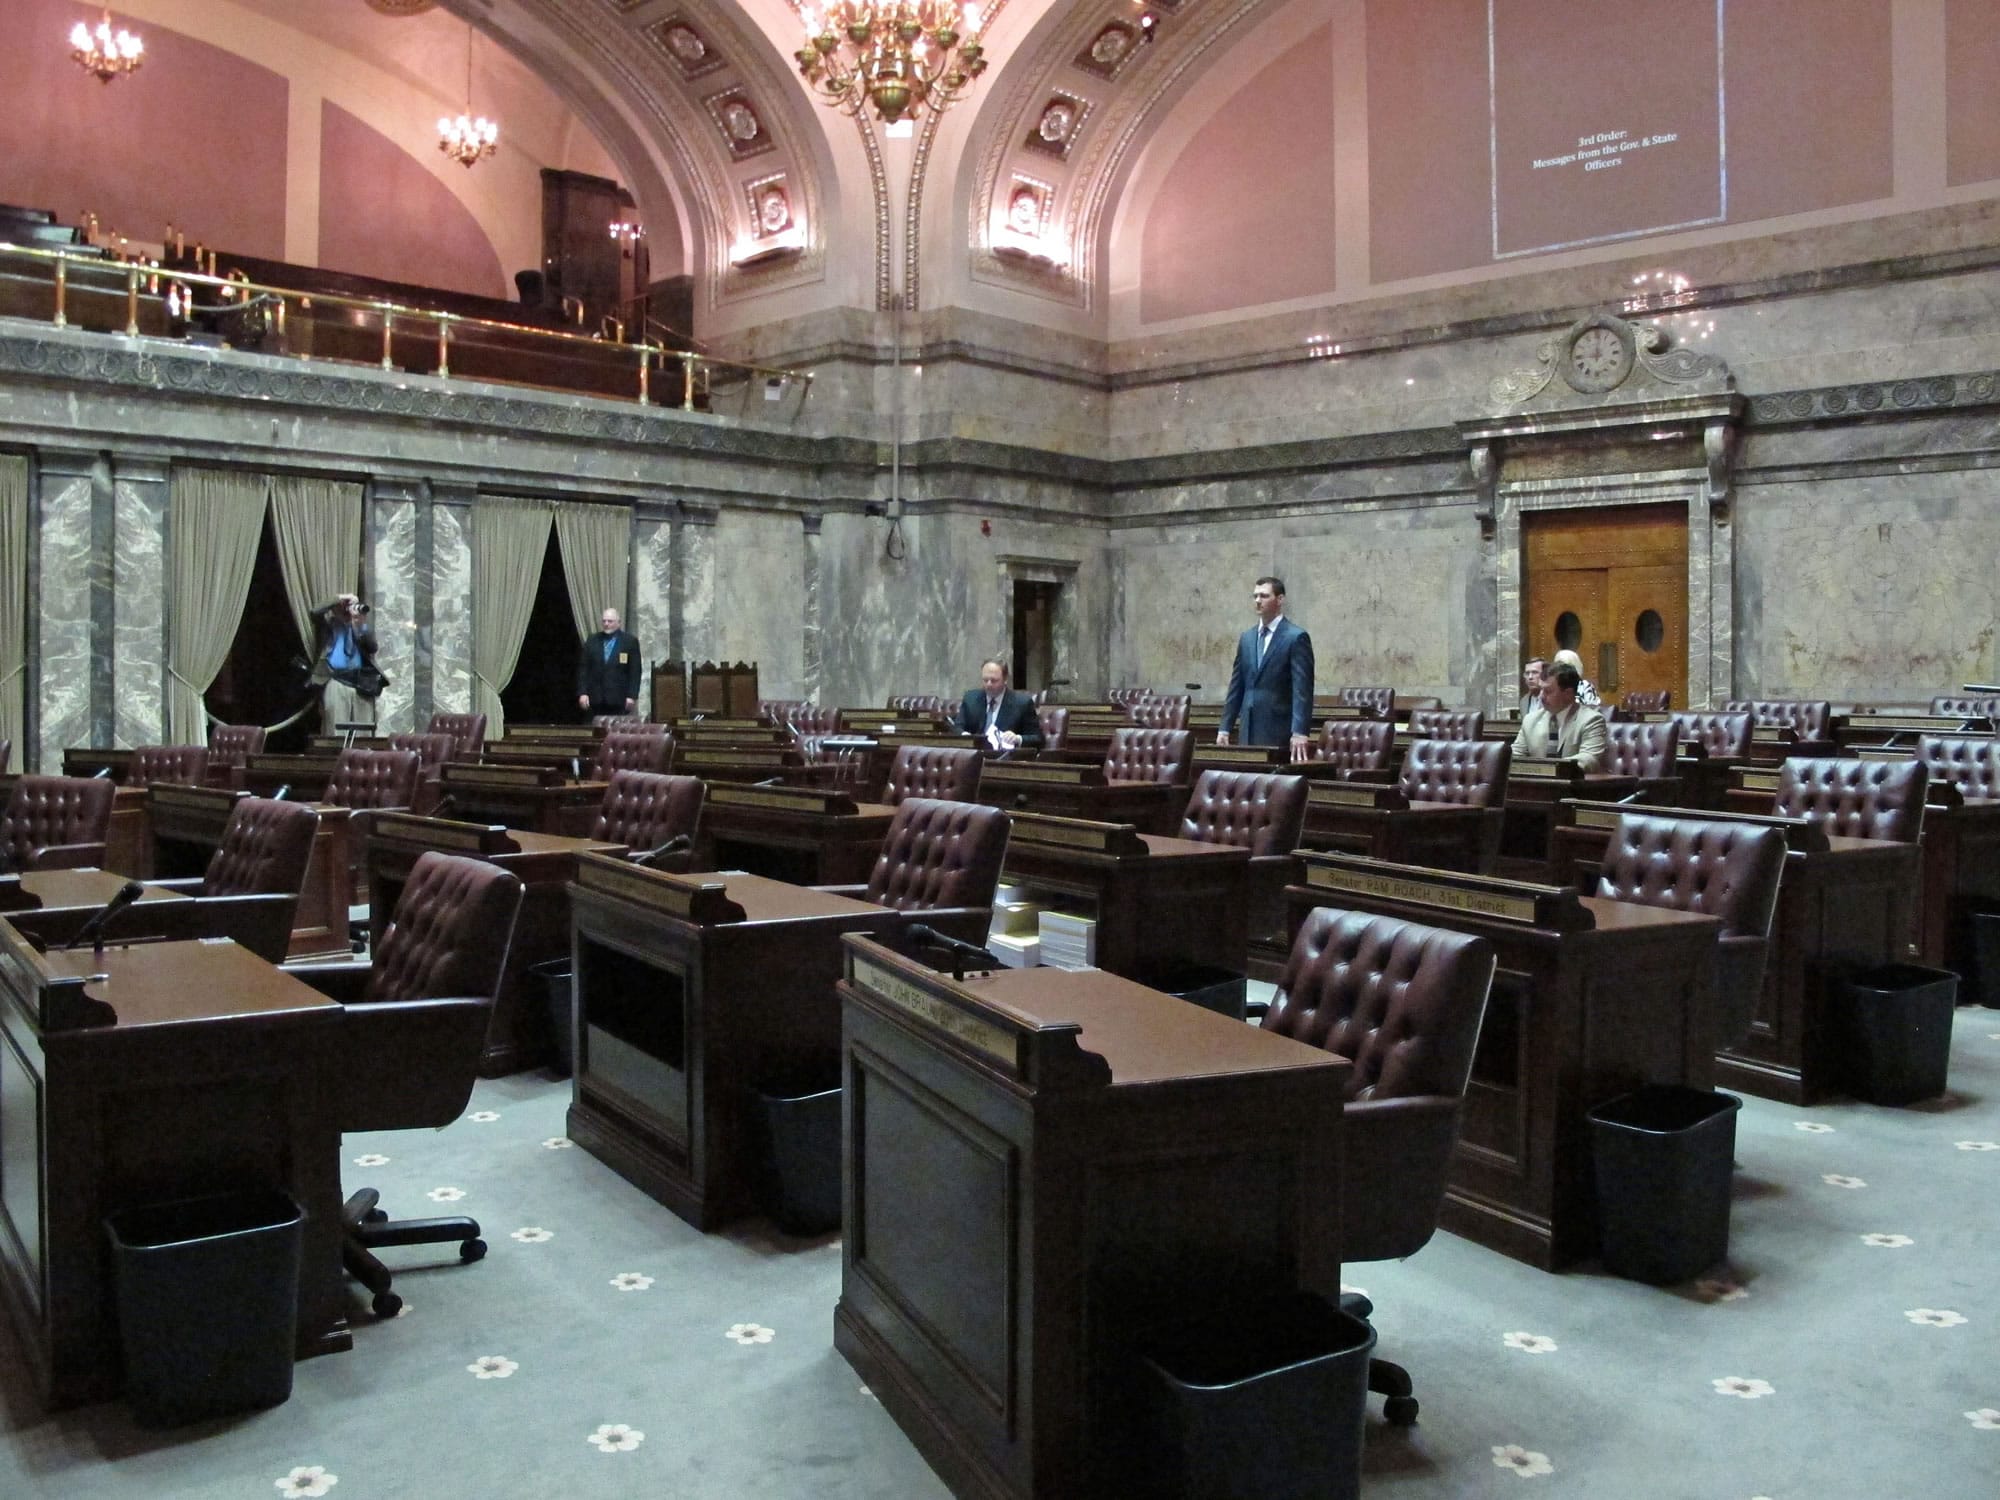 Republican Sen. Joe Fain stands in a mostly empty state Senate chamber after the official start of a special legislative session on Monday in Olympia .